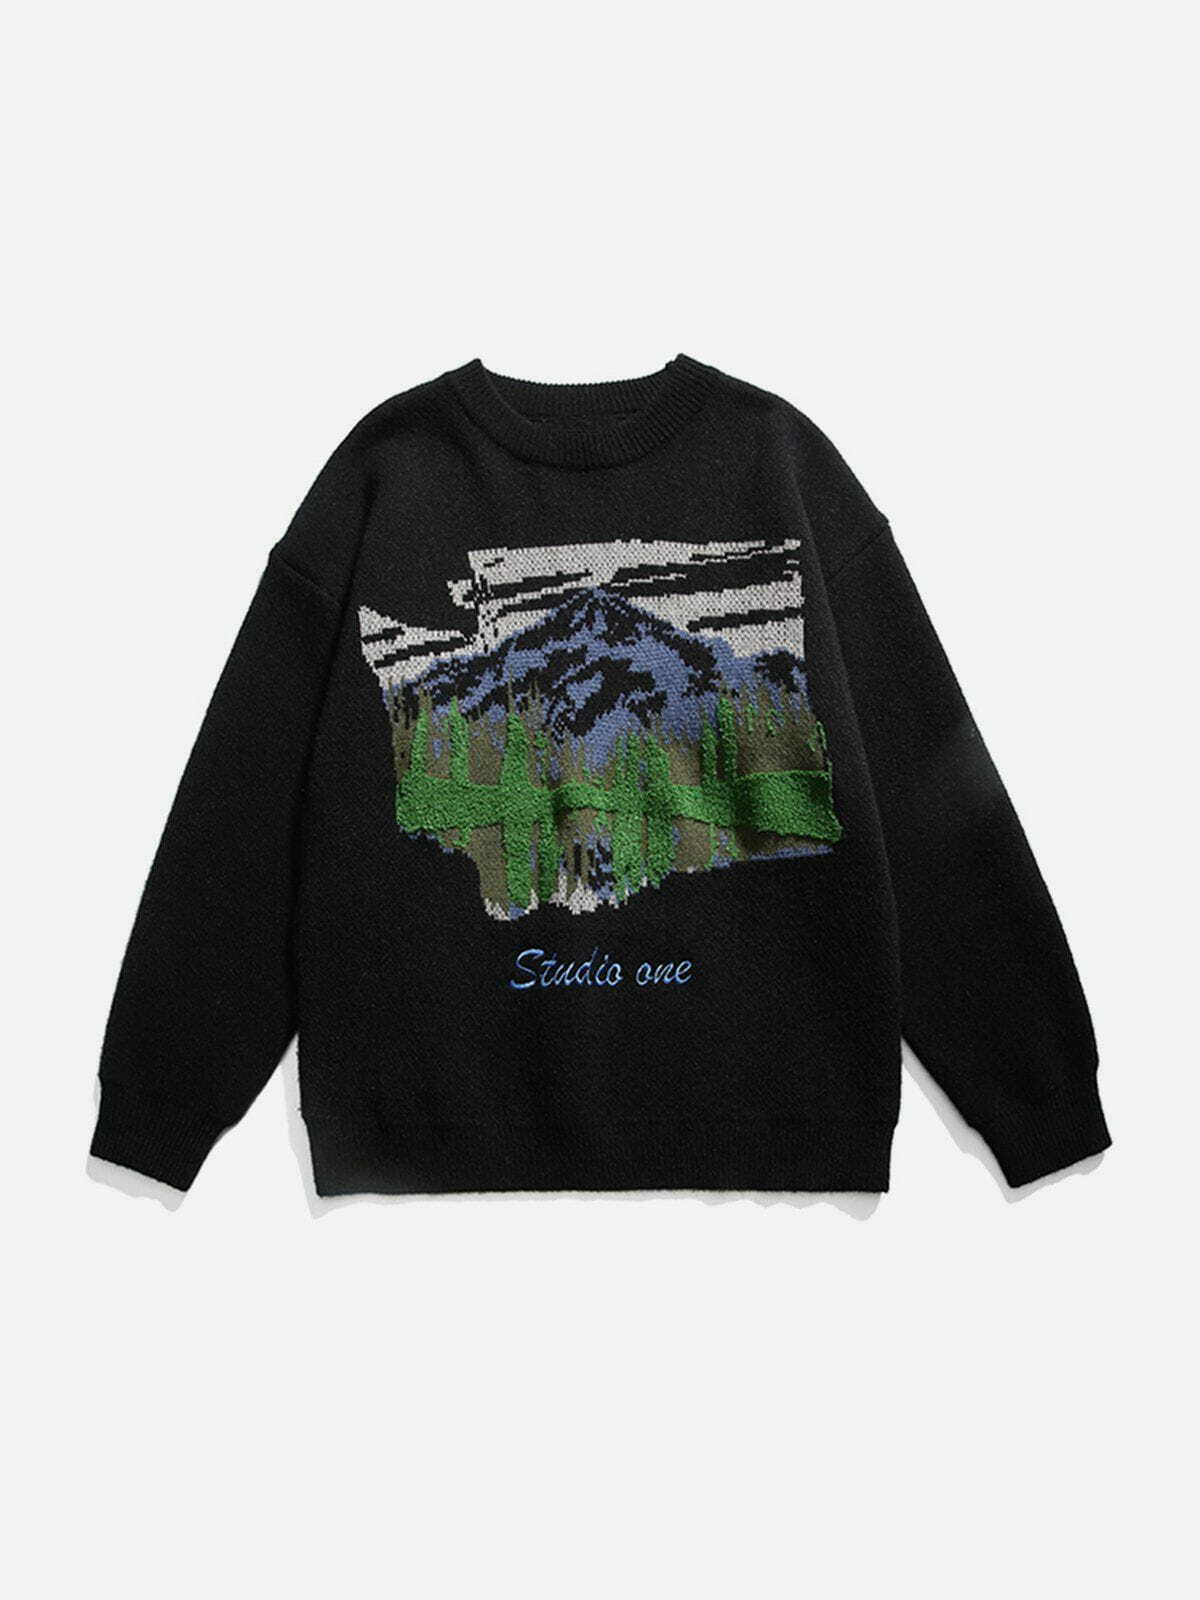 artistic oil painting mountain sweater   chic & unique 2358